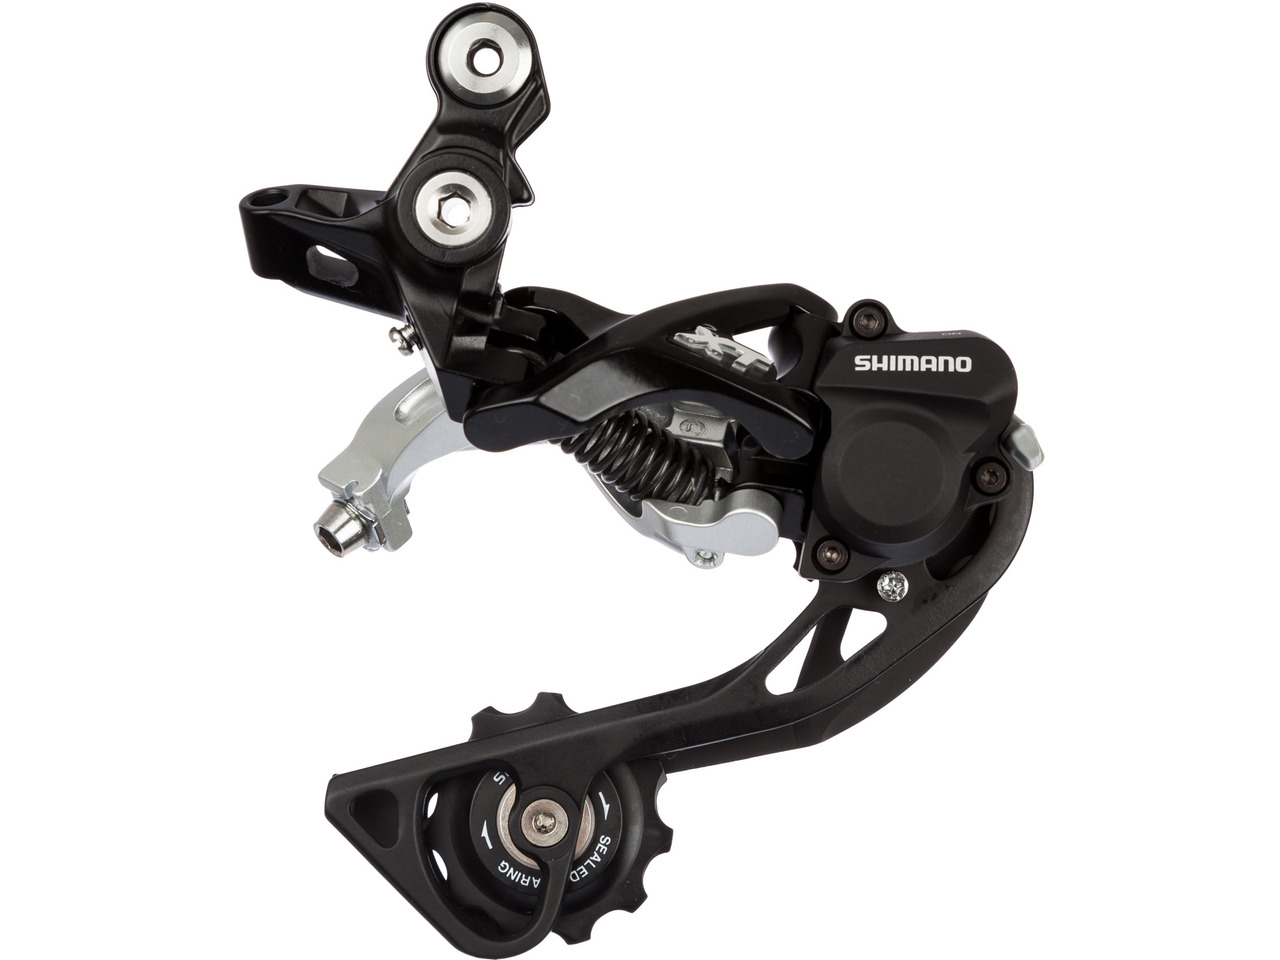 Shimano 10 Speed Derailleur With 11 Speed Shifter [Explained]